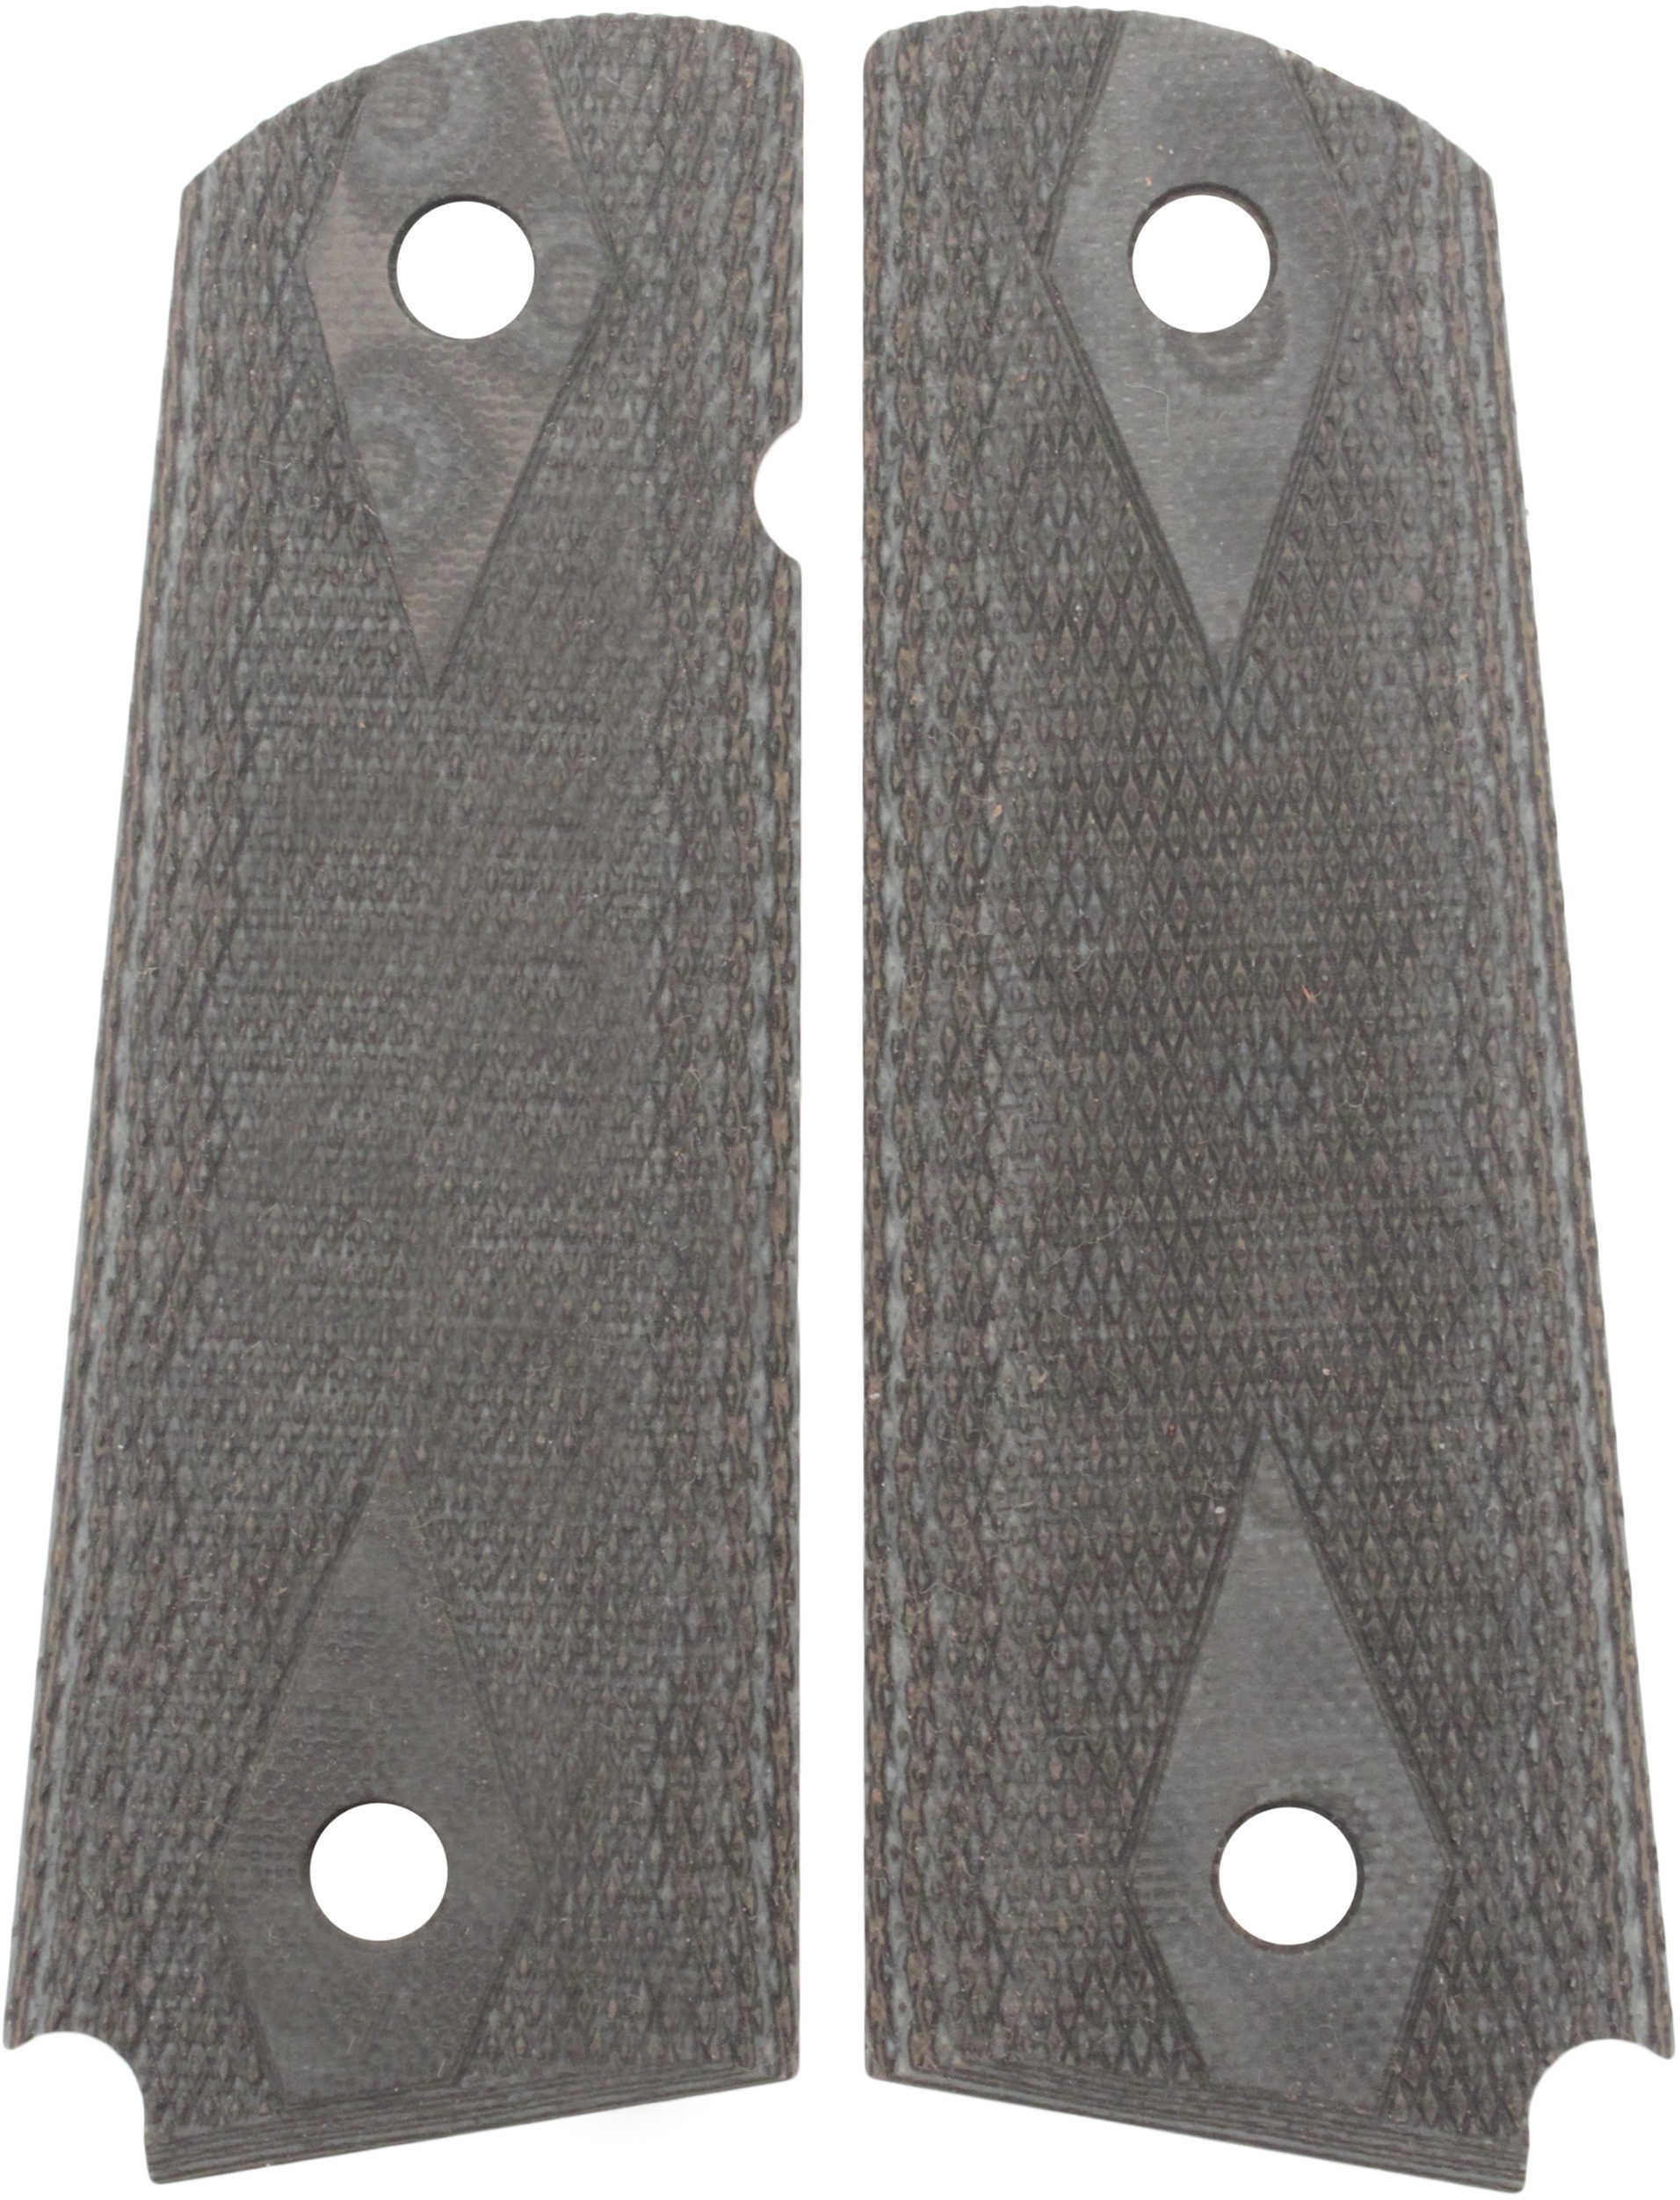 Hogue 1911 Government/Commander 3/16" Thin Grips G-10 Checkered G-Mascus Black/Grey 01477-BLKGRY